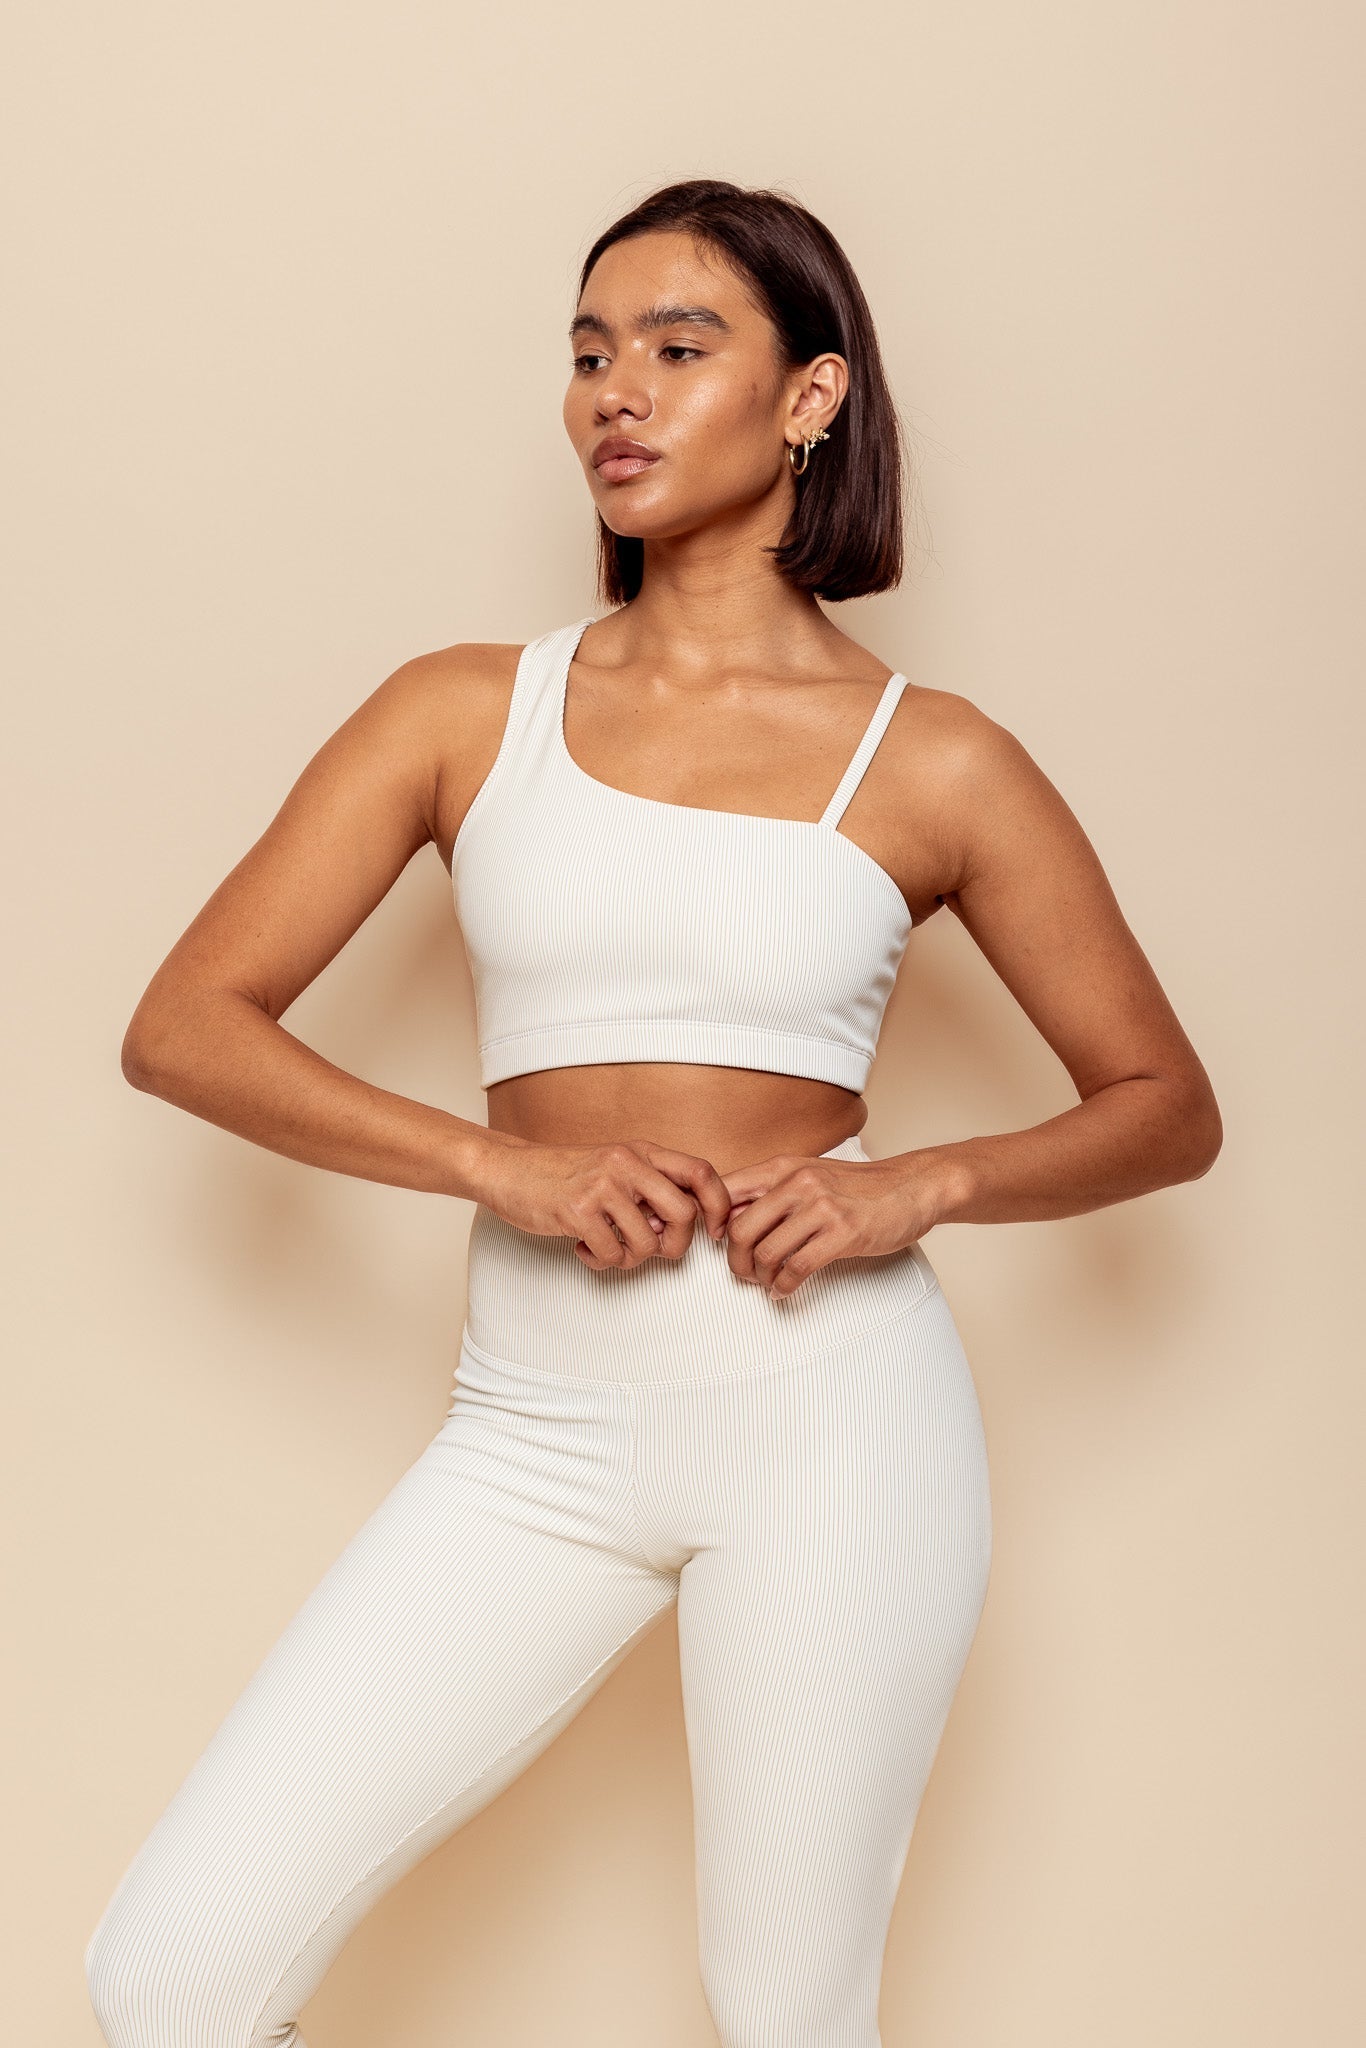 Shop HIIT Sports Bras for Women up to 65% Off